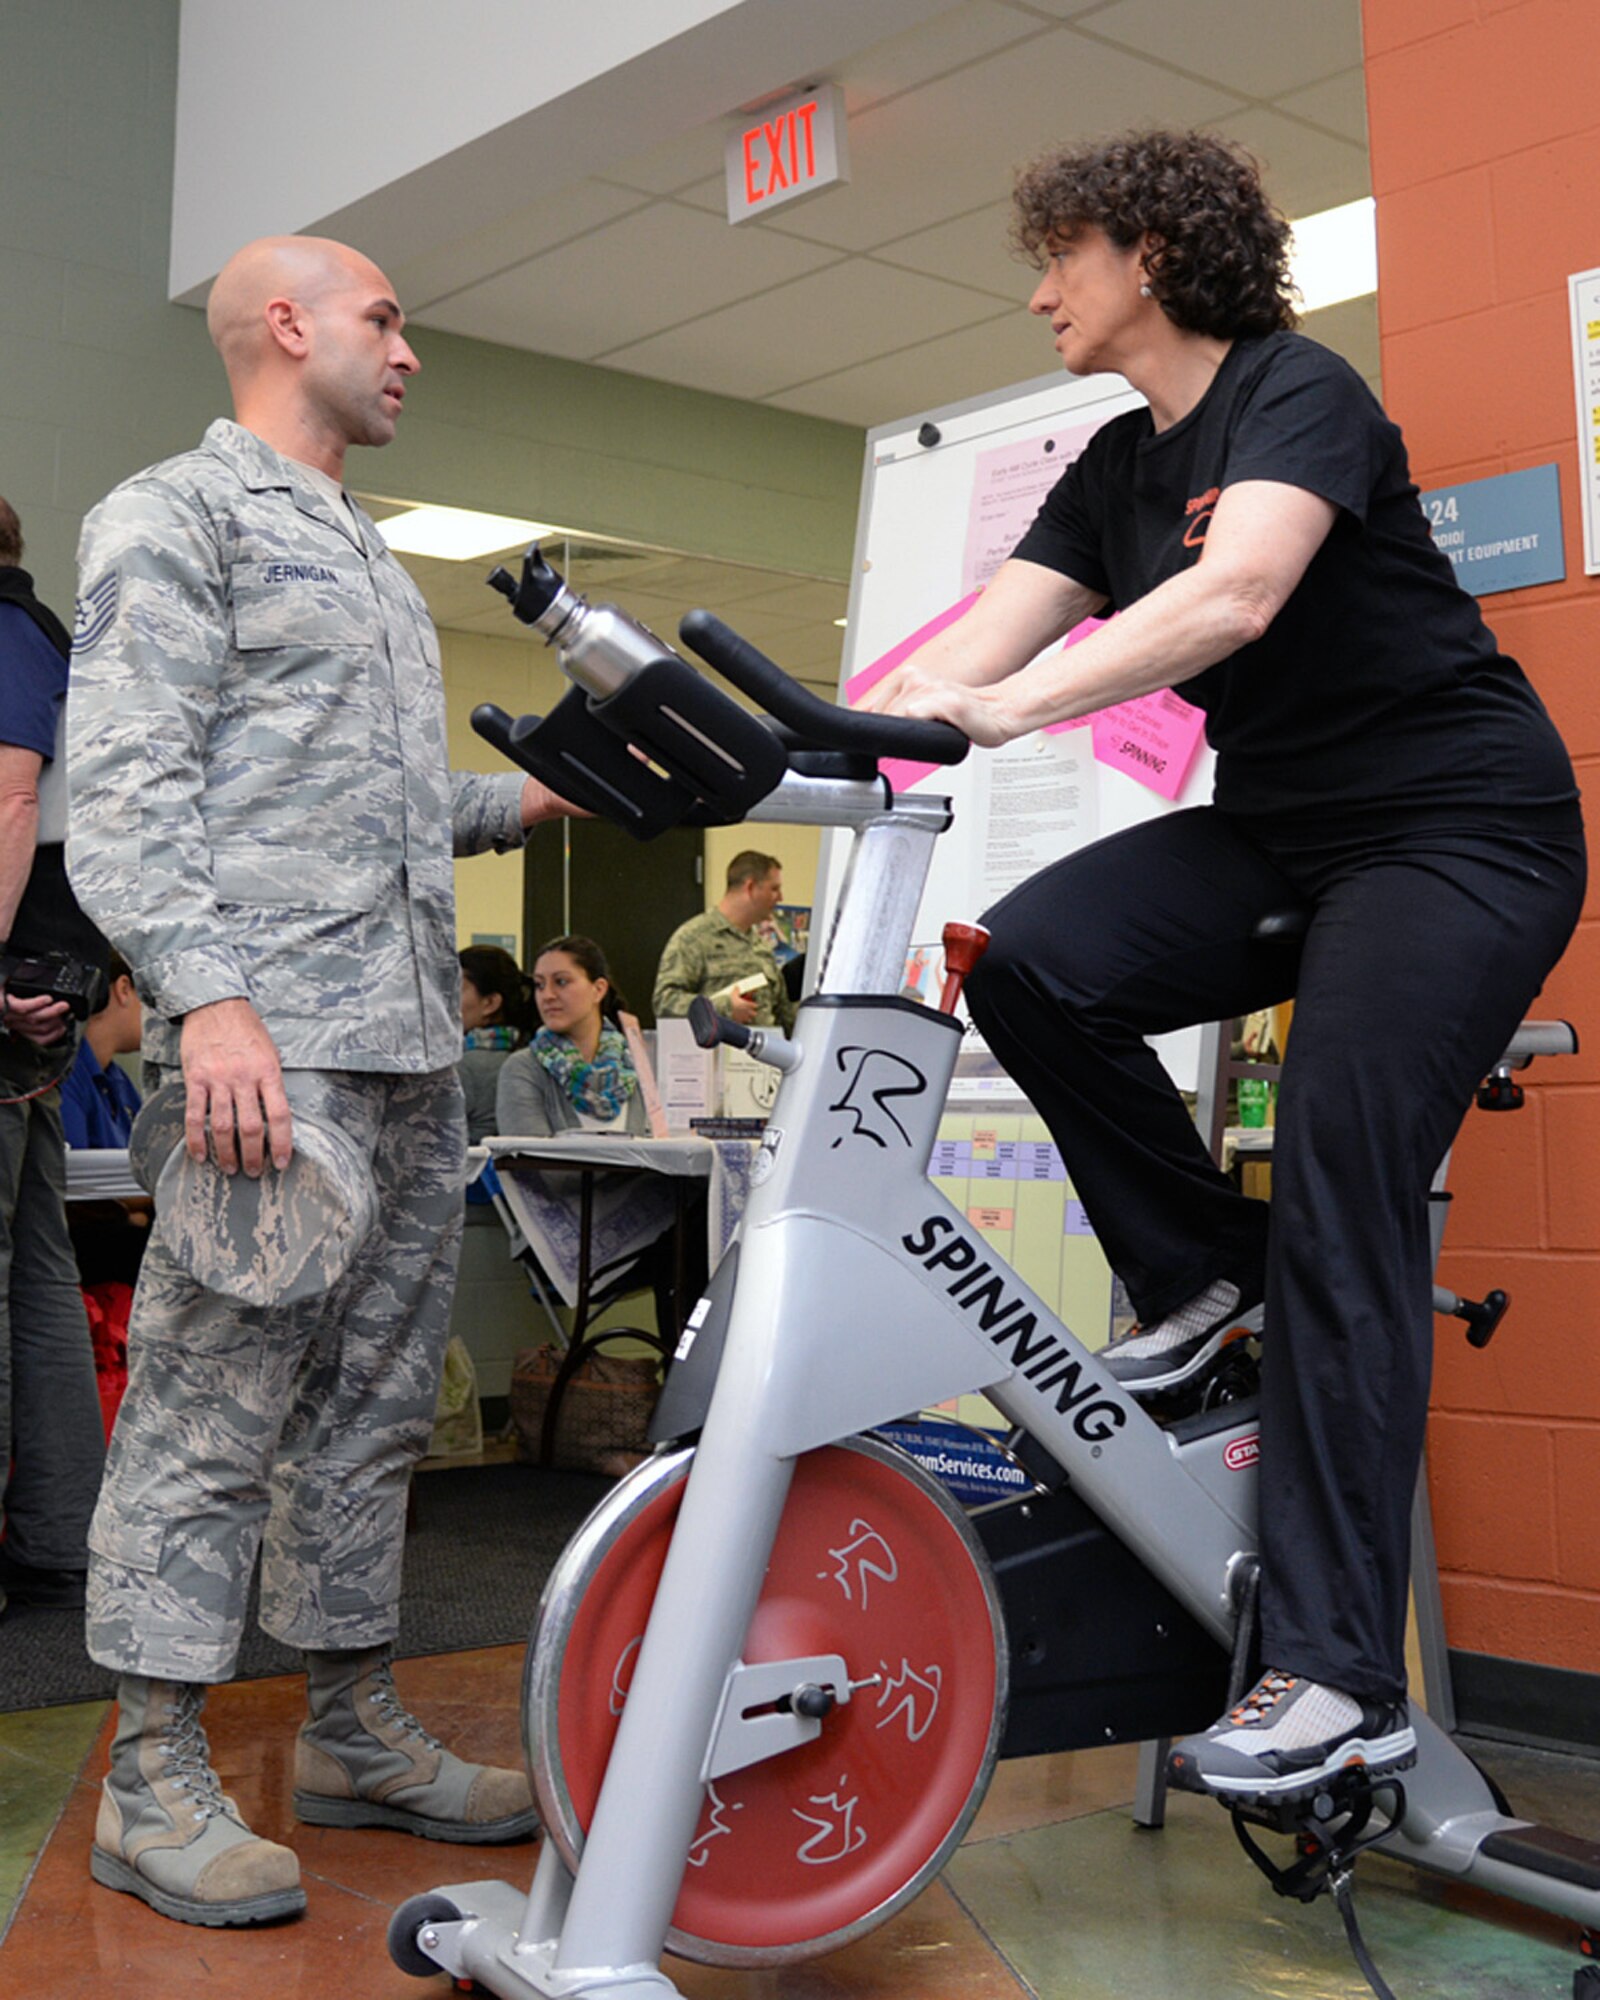 Sheryl Walsh, Fitness and Sports Center spinning instructor, explains proper technique to Tech. Sgt. Jason Jernigan, Patriot Honor Guard NCO in charge, at the Health and Fitness Expo at the Fitness and Sports Center, March 25. The base fitness center offers indoor Spinning classes each Tuesday and Thursday morning from 5:45 to 6:30 a.m. (U.S. Air Force photo by Linda LaBonte Britt)